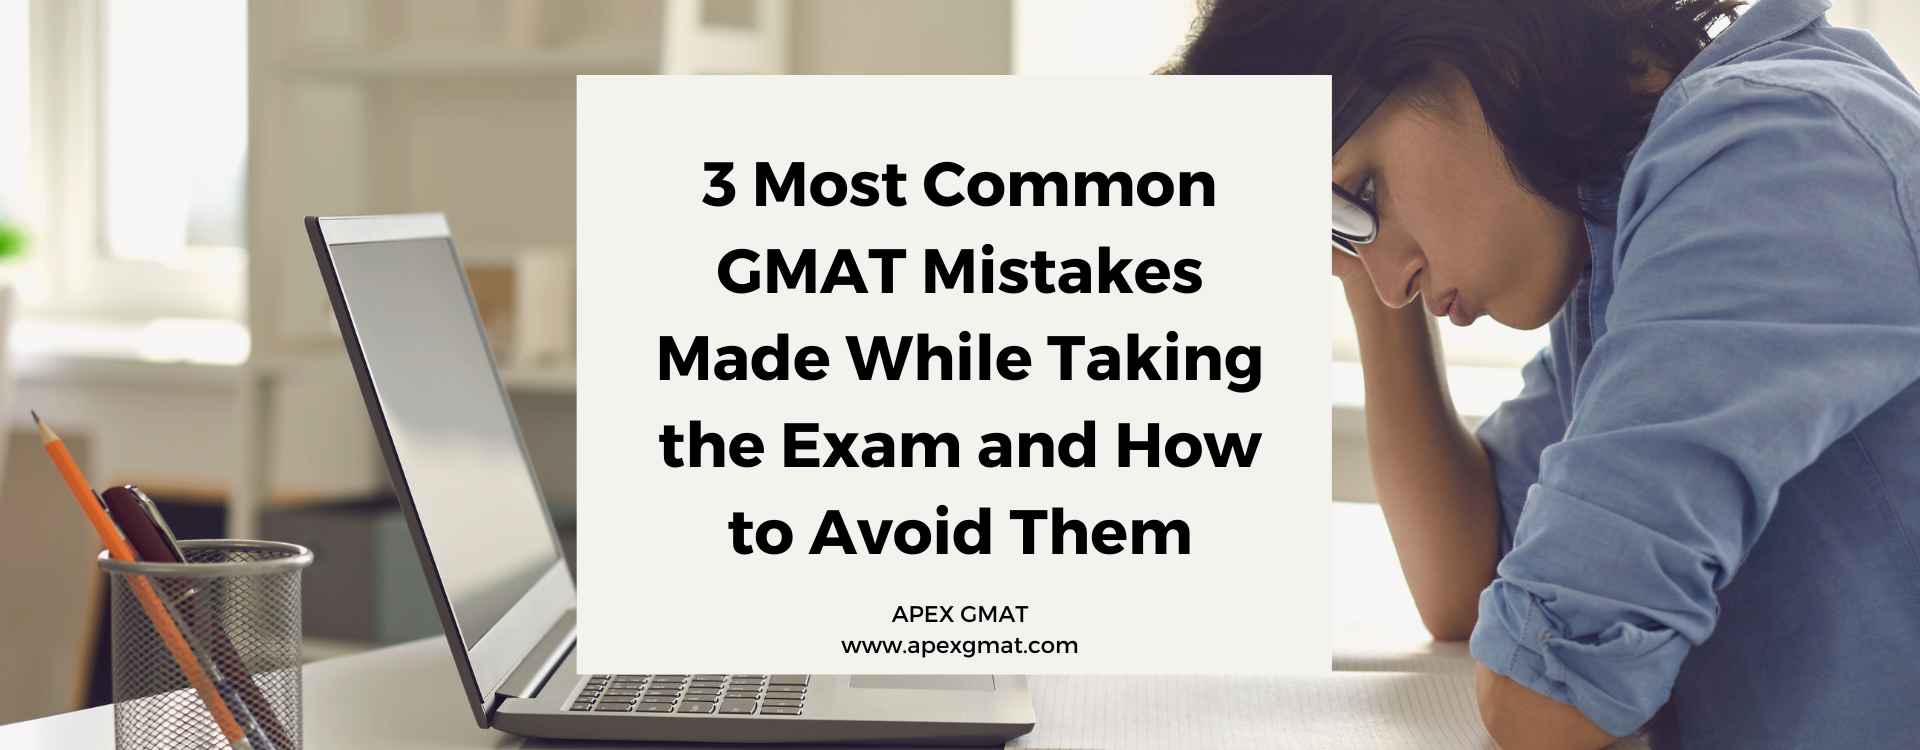 3 Most Common GMAT Mistakes Made During the Exam